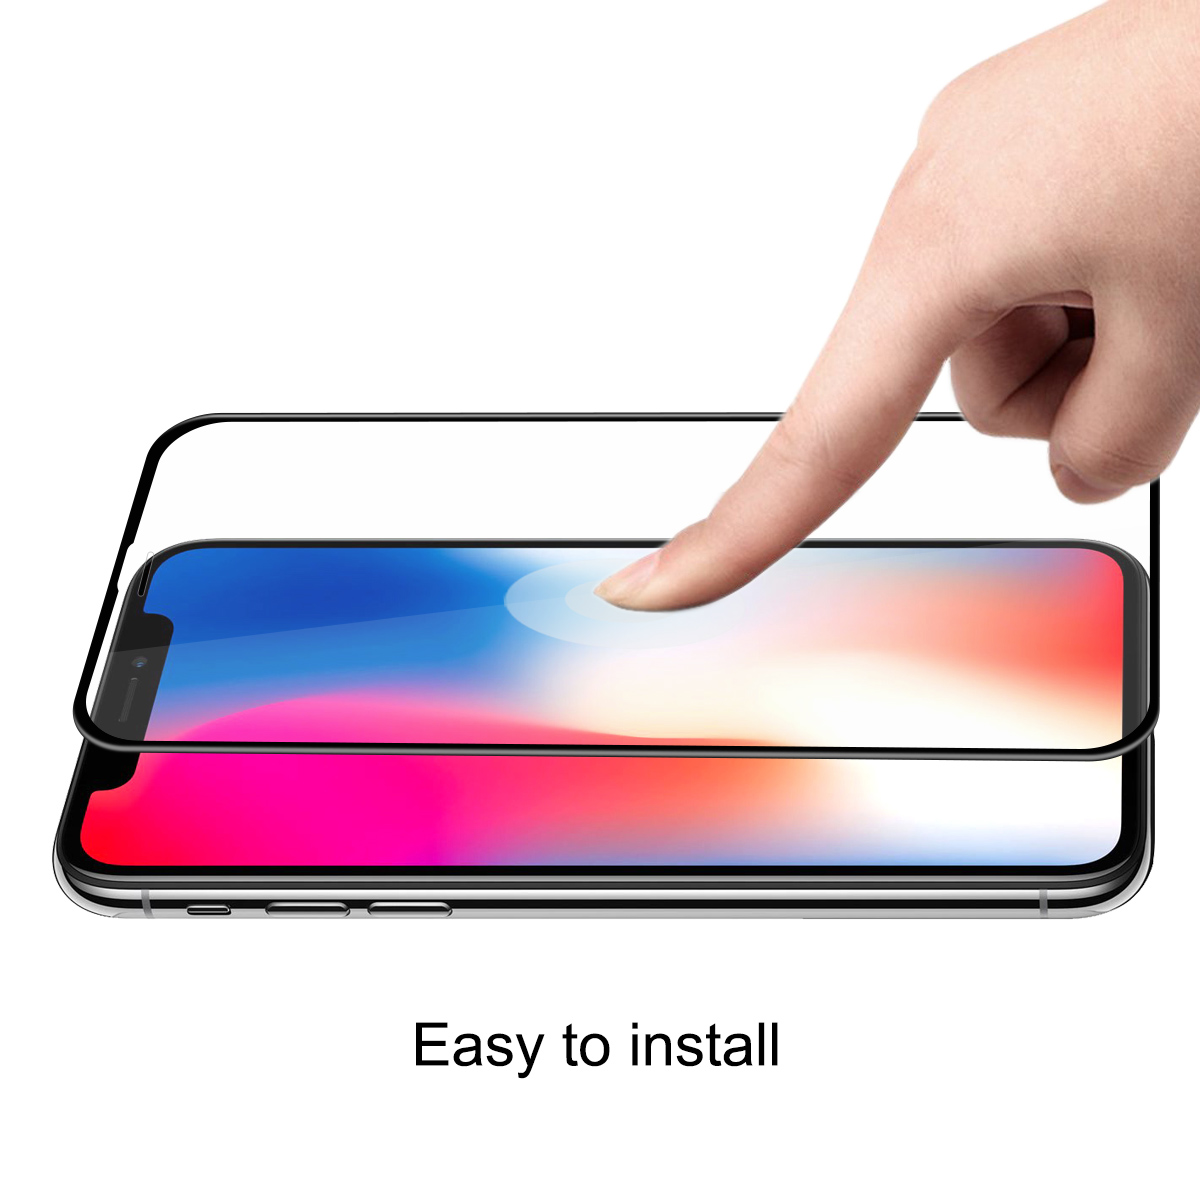 Enkay-02mm-6D-Curved-Edge-Soft-TPU-Tempered-Glass-Screen-Protector-For-iPhone-XSiPhone-XiPhone-11-Pr-1335388-4